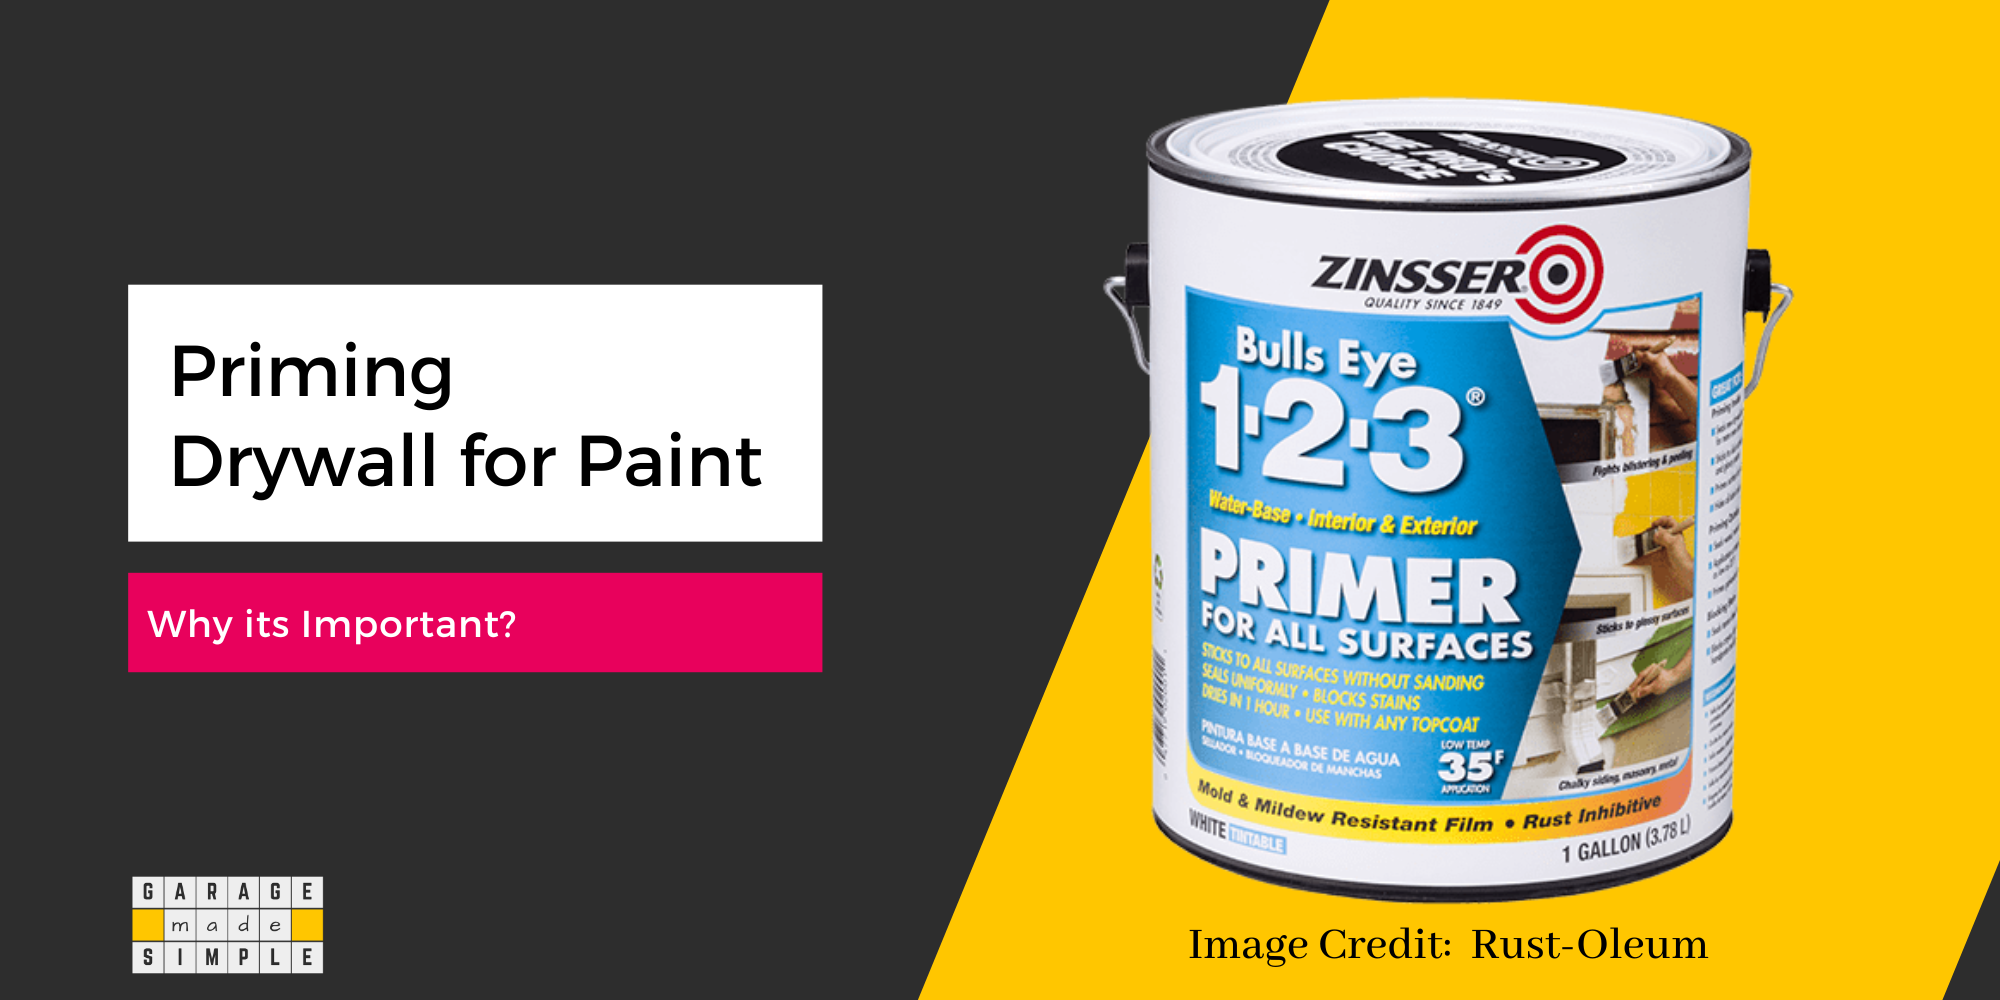 Priming Drywall for Paint: Why is it Important & 3 Easy Steps to Do It!